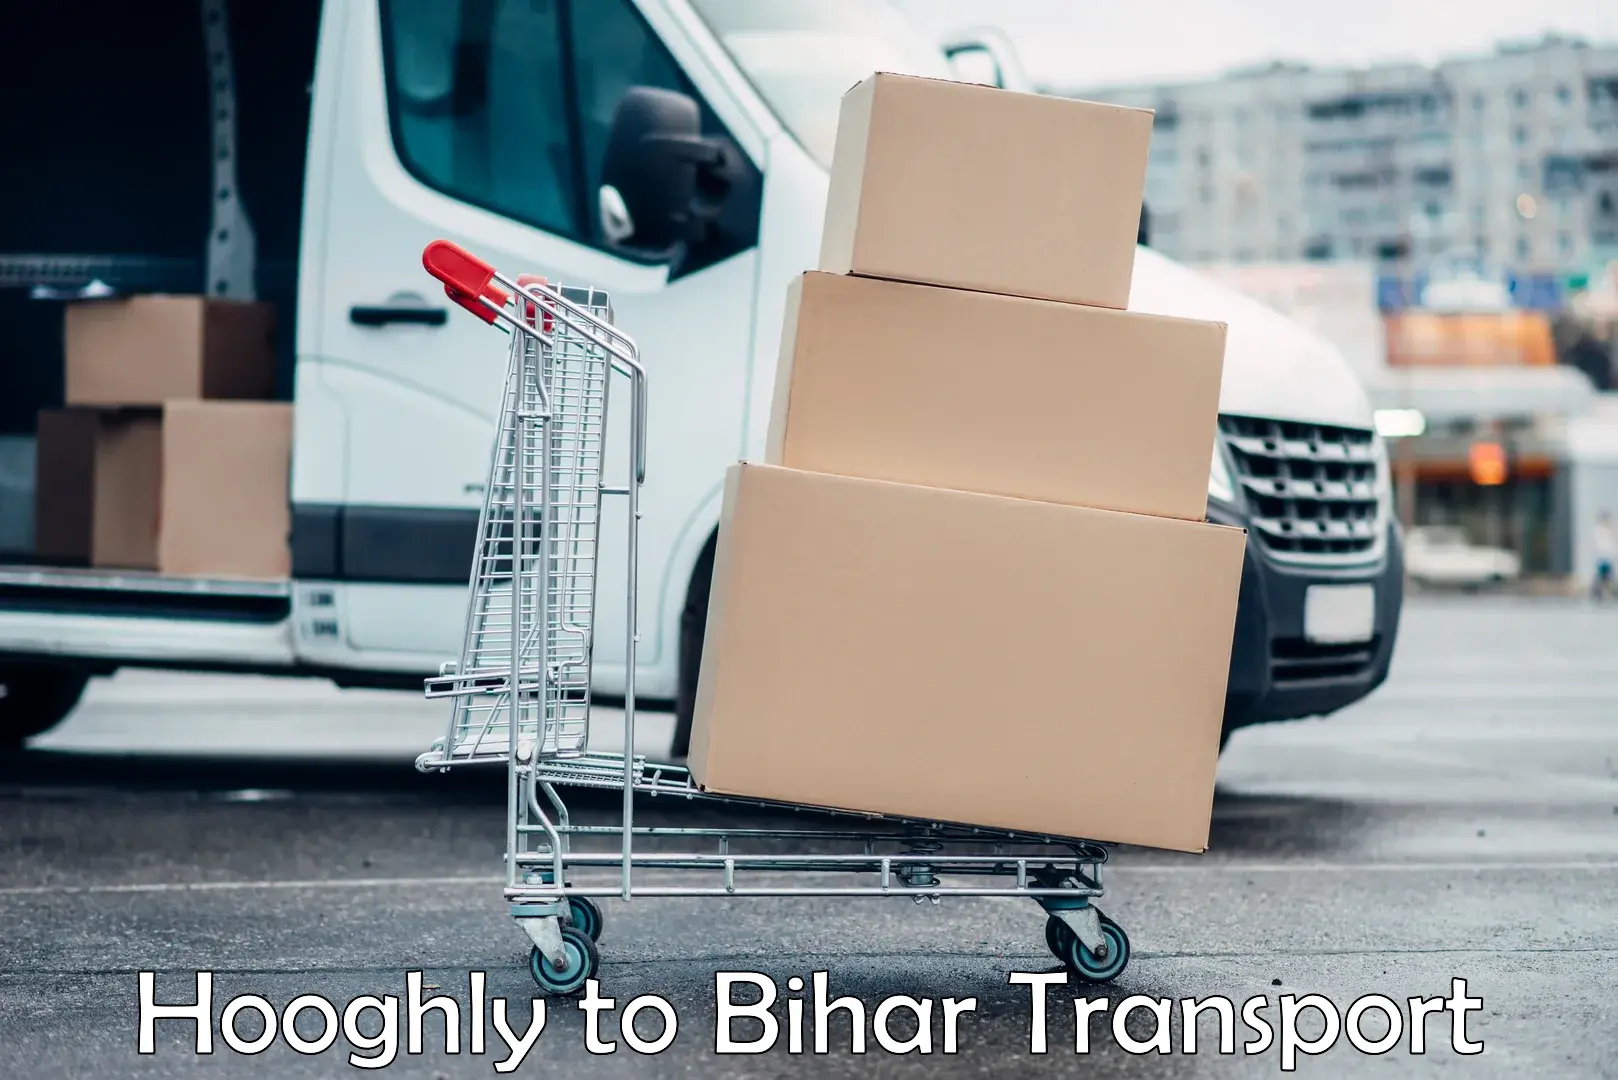 Vehicle transport services Hooghly to Bihar